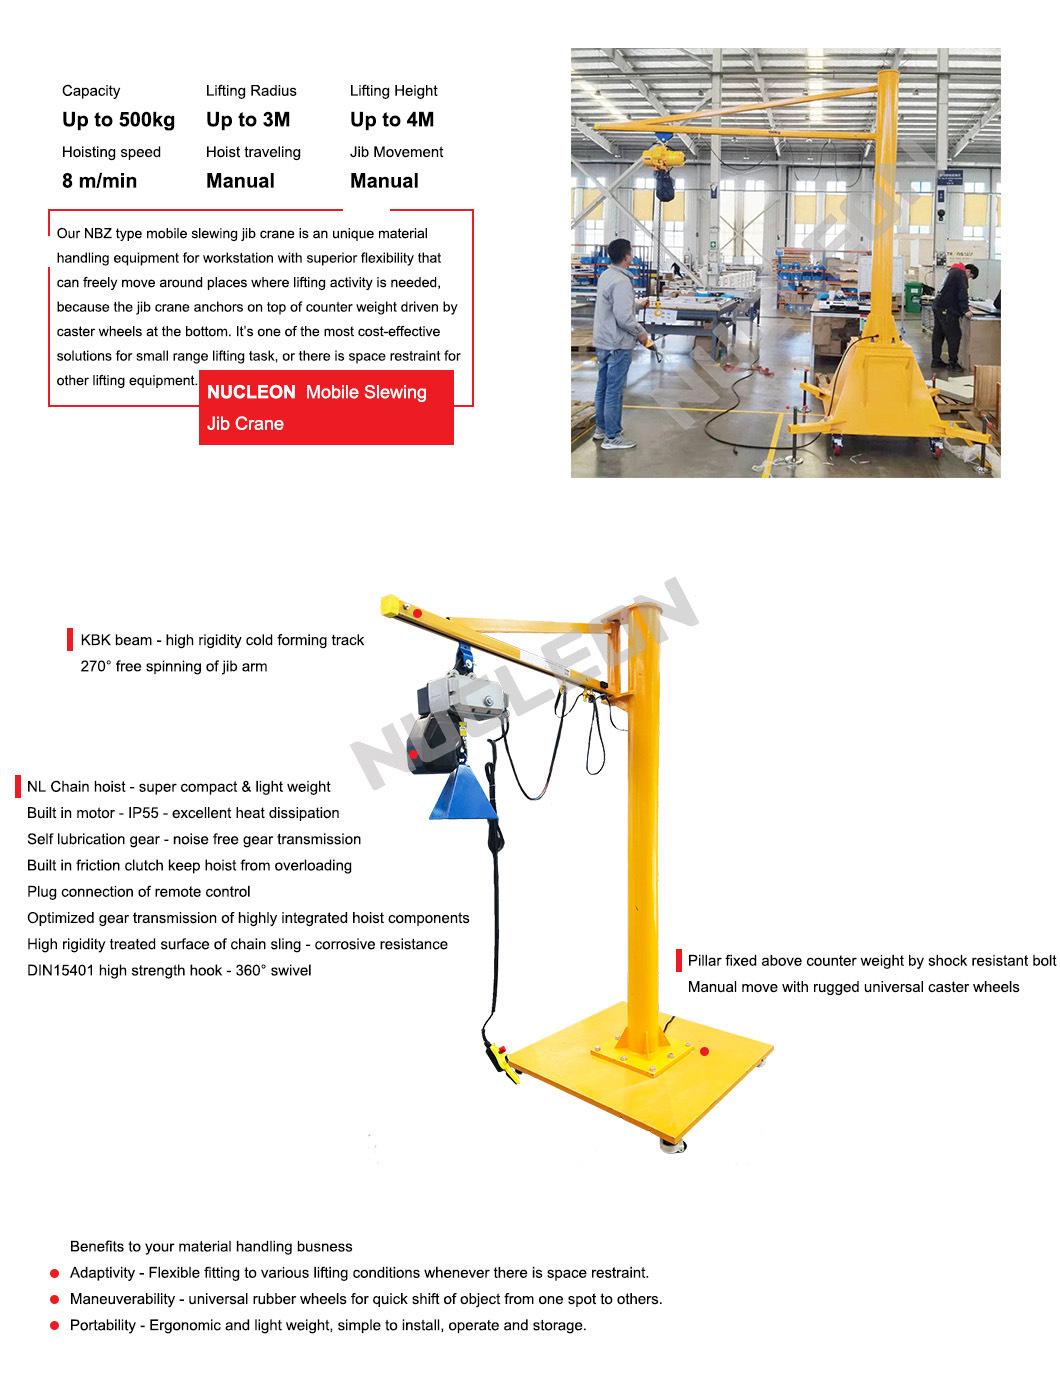 CE Certified 100kg Portable Moveable Jib Crane with Travelling Caster Wheels